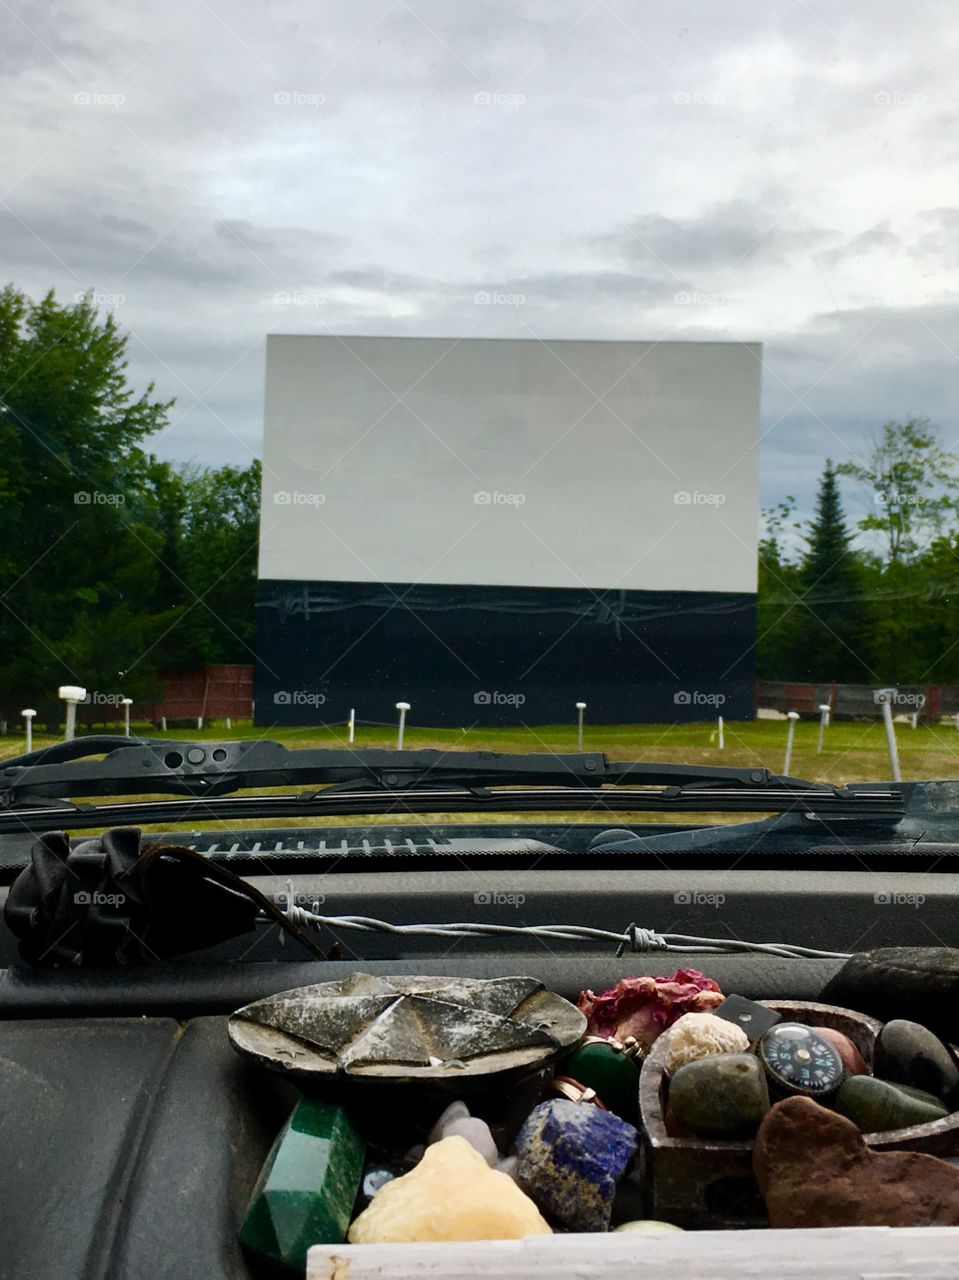 Saturday at the Drive In